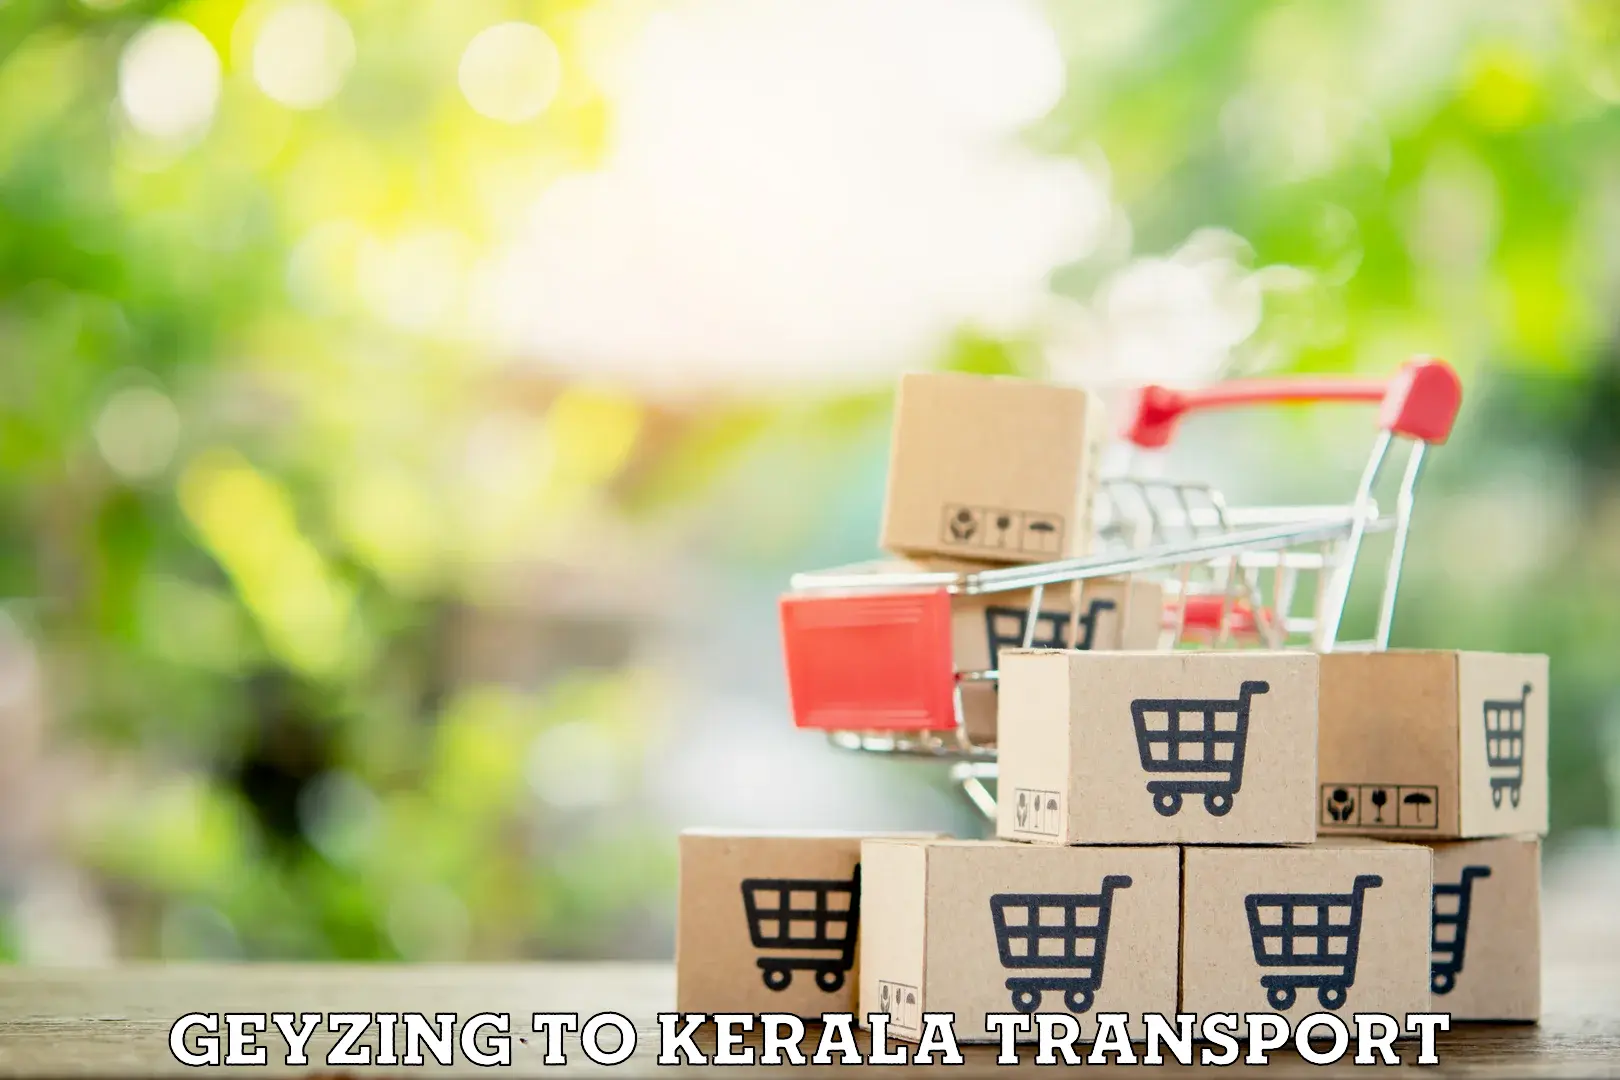 Goods delivery service Geyzing to Ponnani